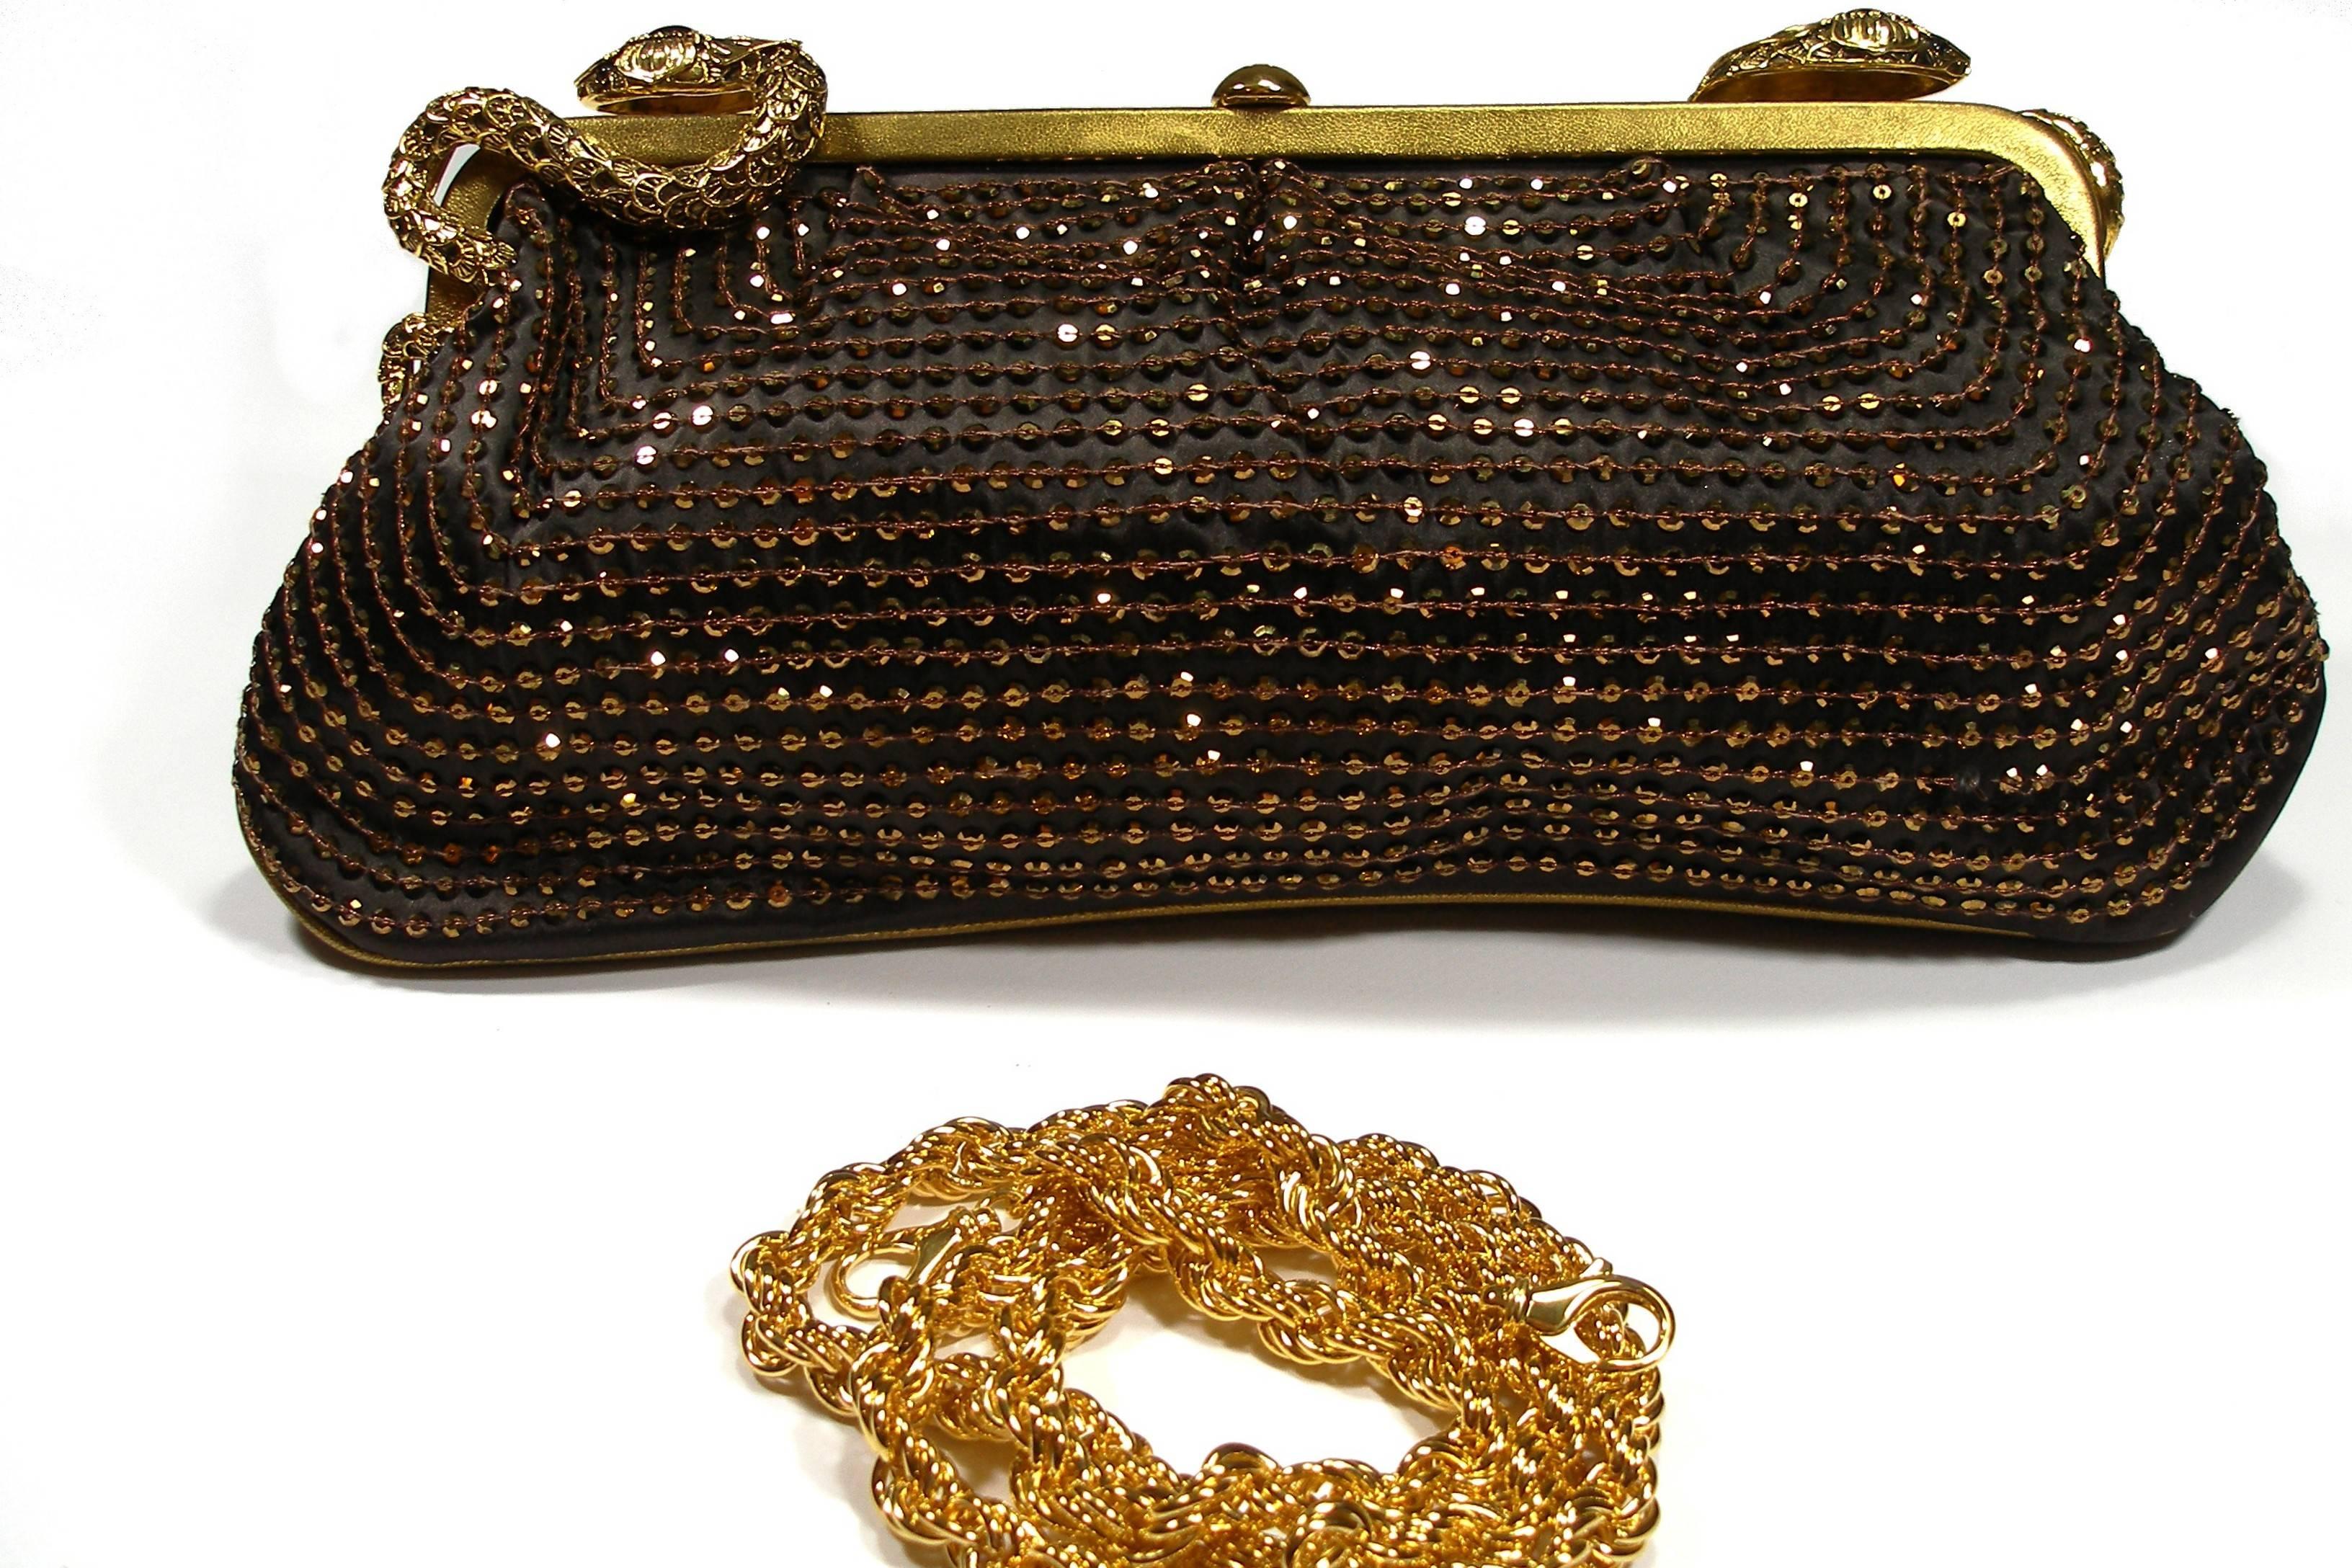 Stunning Roberto Cavalli Sequin Bronze Evening Bag or clutch. Gold python details with rhinestone and bronze sequin . Gold hardware with tan leather interior with a single zip closure. 
Amovible trap in gold métal 
Size : 32 x 15 cm
Strap : 88 cm